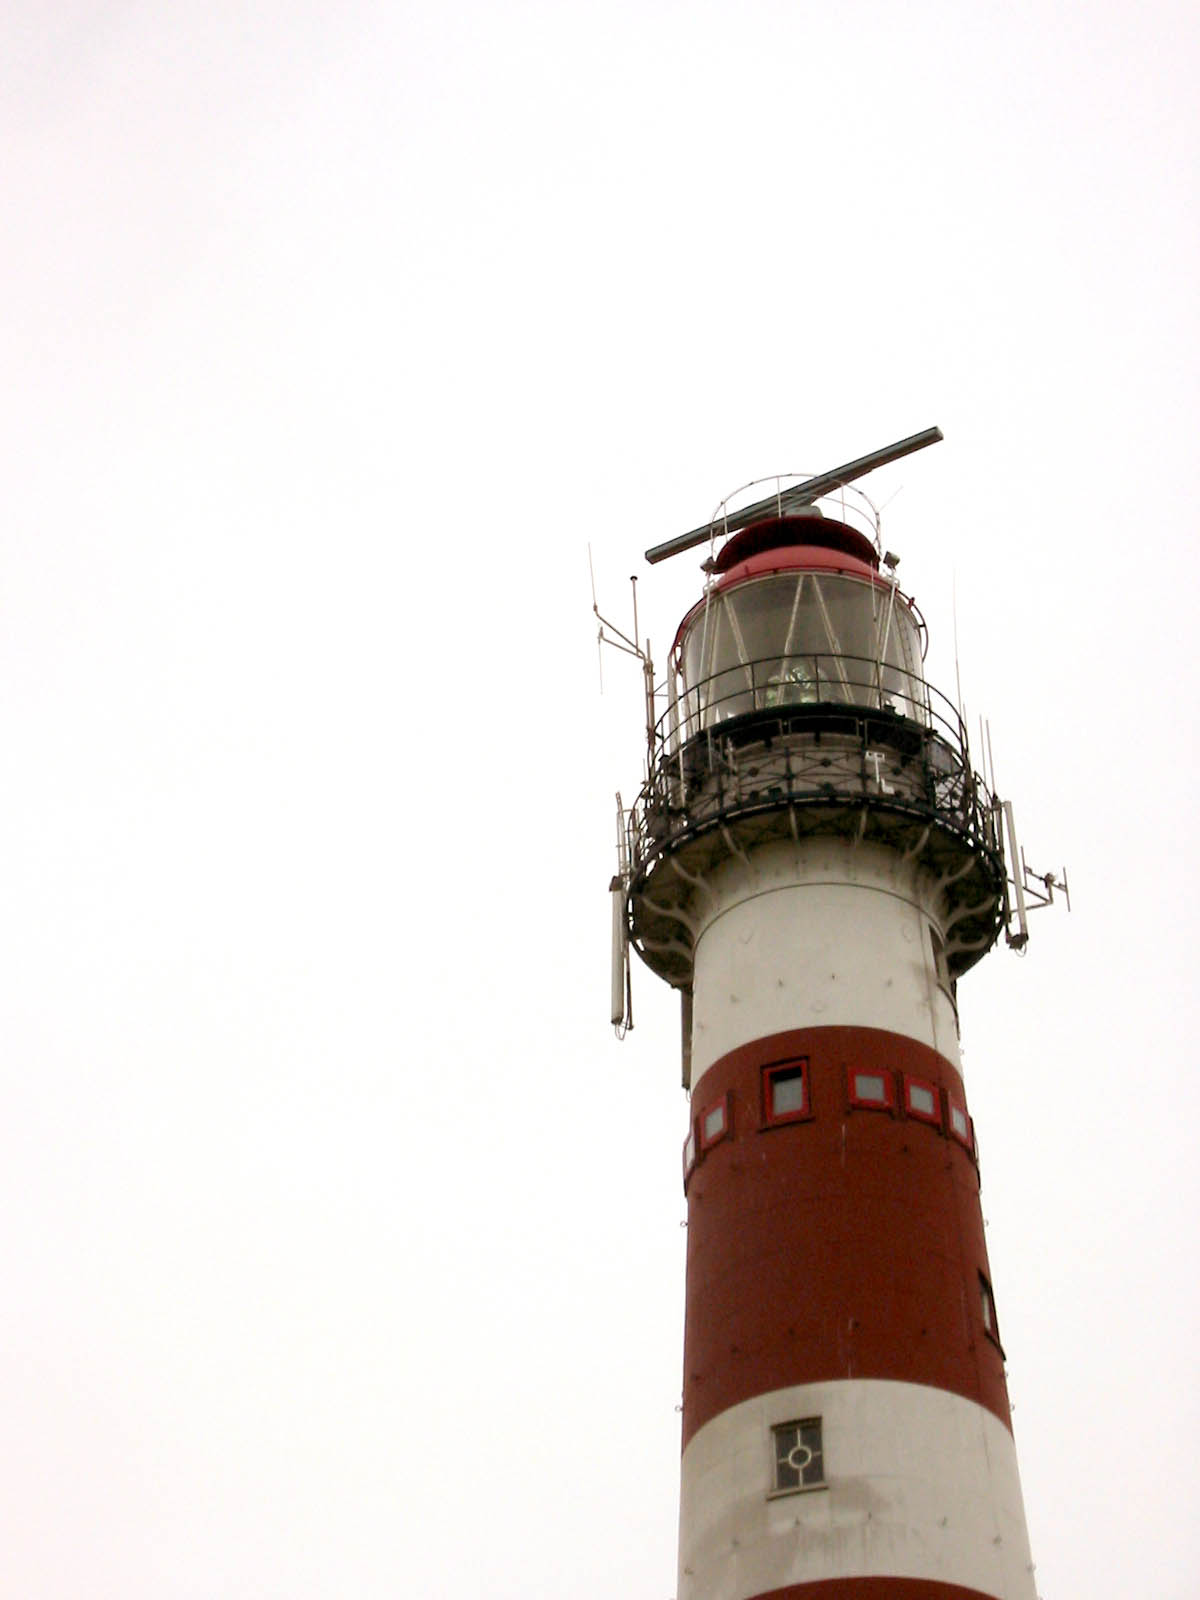 lighthouse red white and stripes shipping tall building top